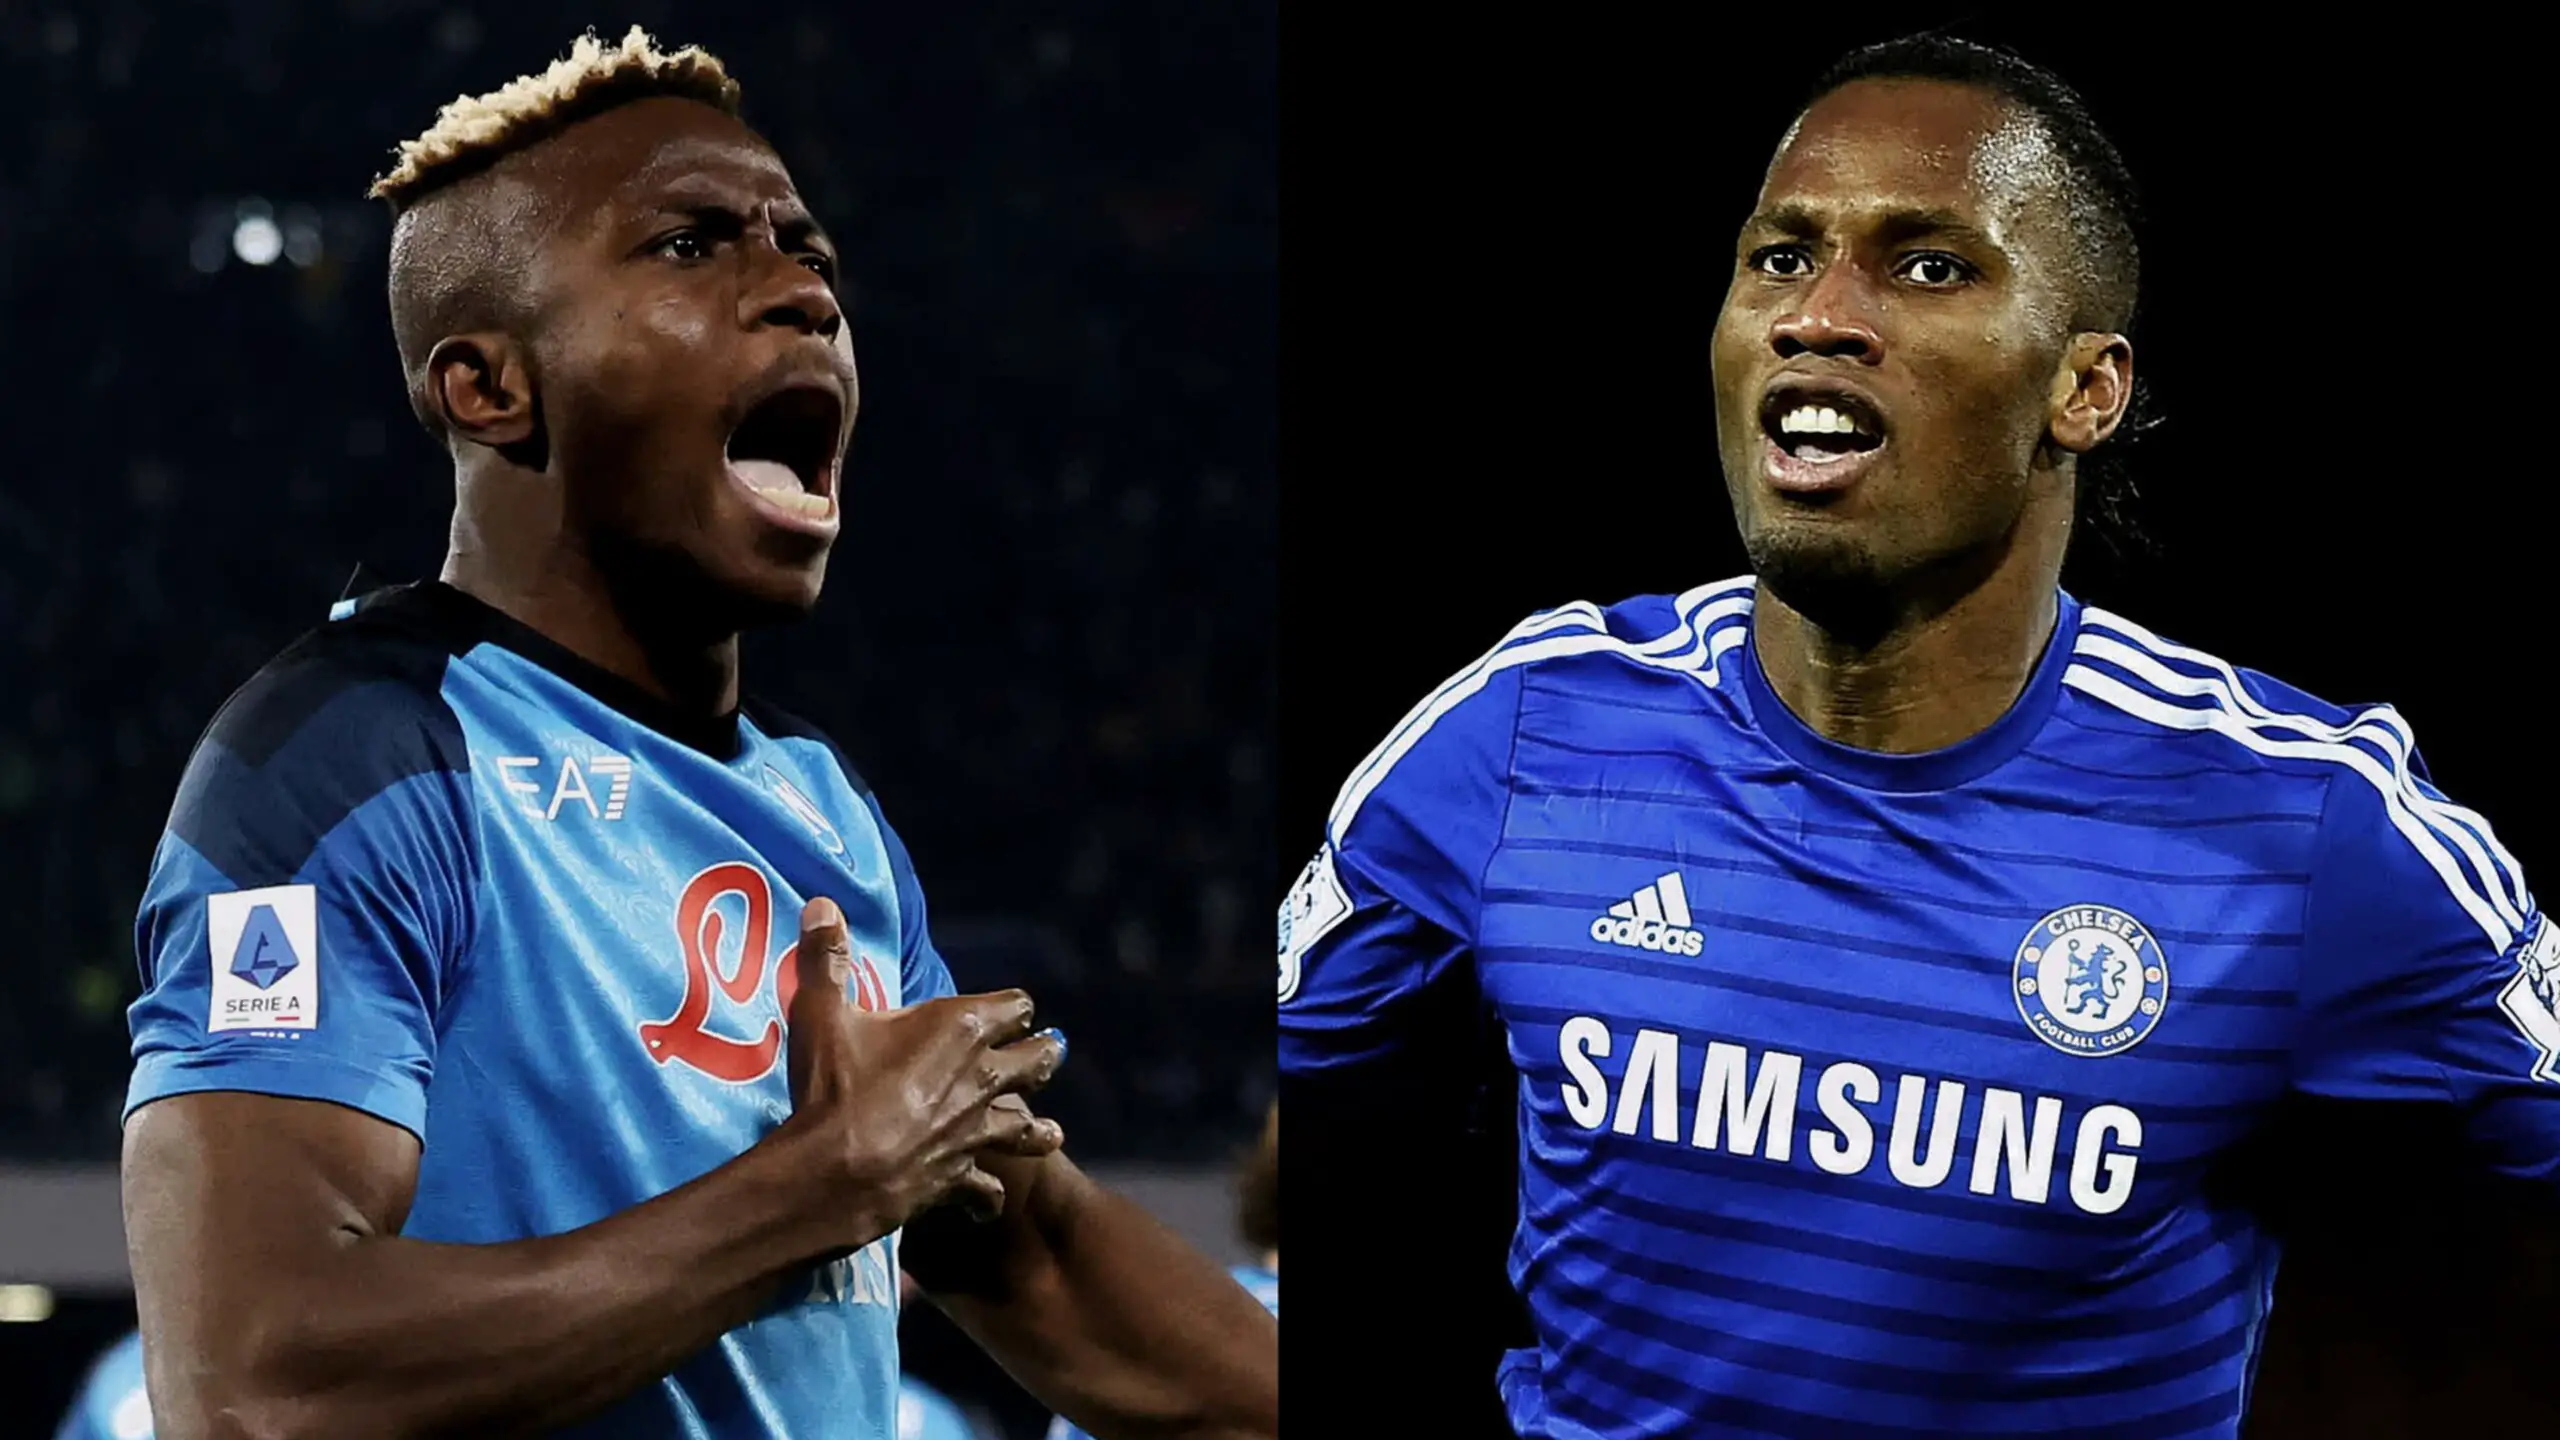 Osimhen Is As Good As Drogba, Mikel Declares